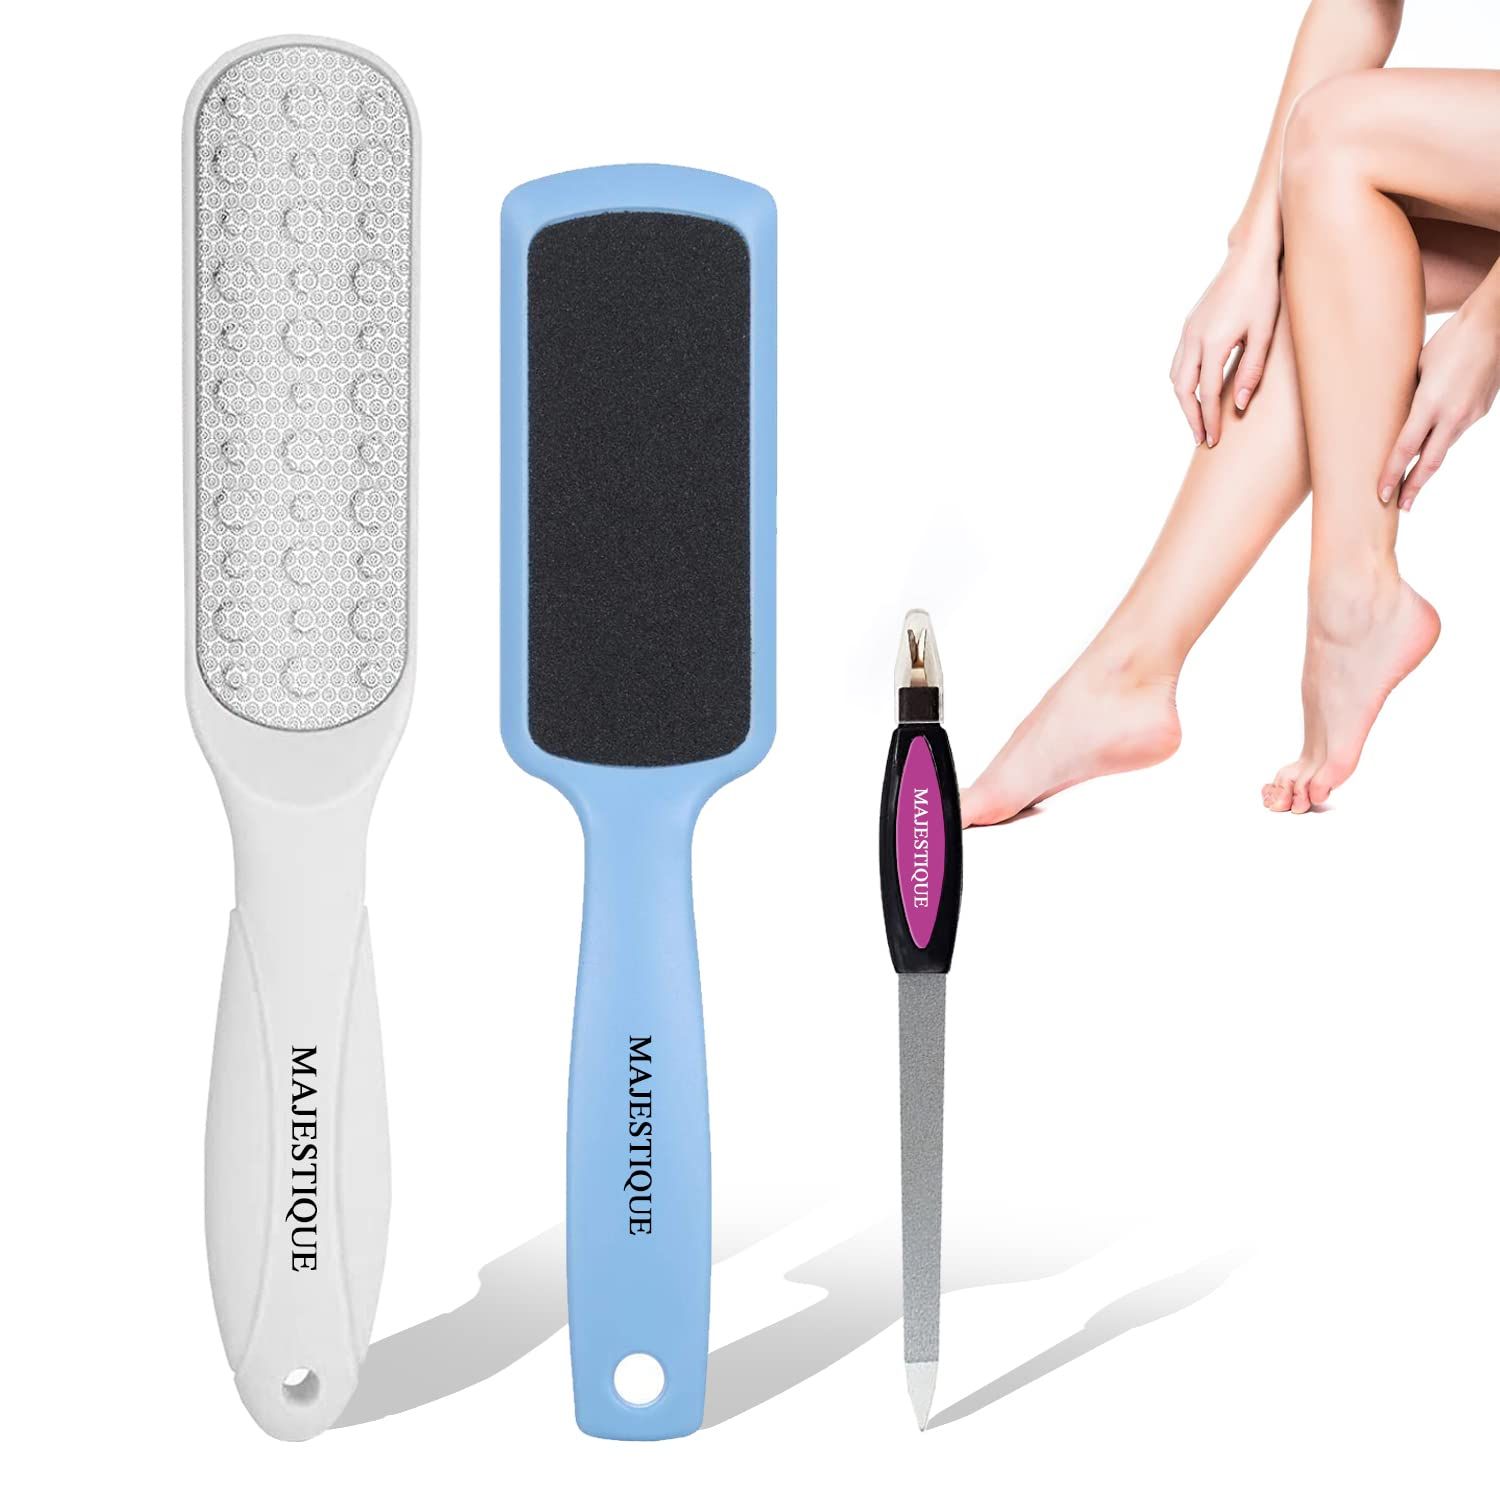 FN 332 Majestique Double-Sided Foot Scrubber, Foot File Callus Remover  Professional Pedicure